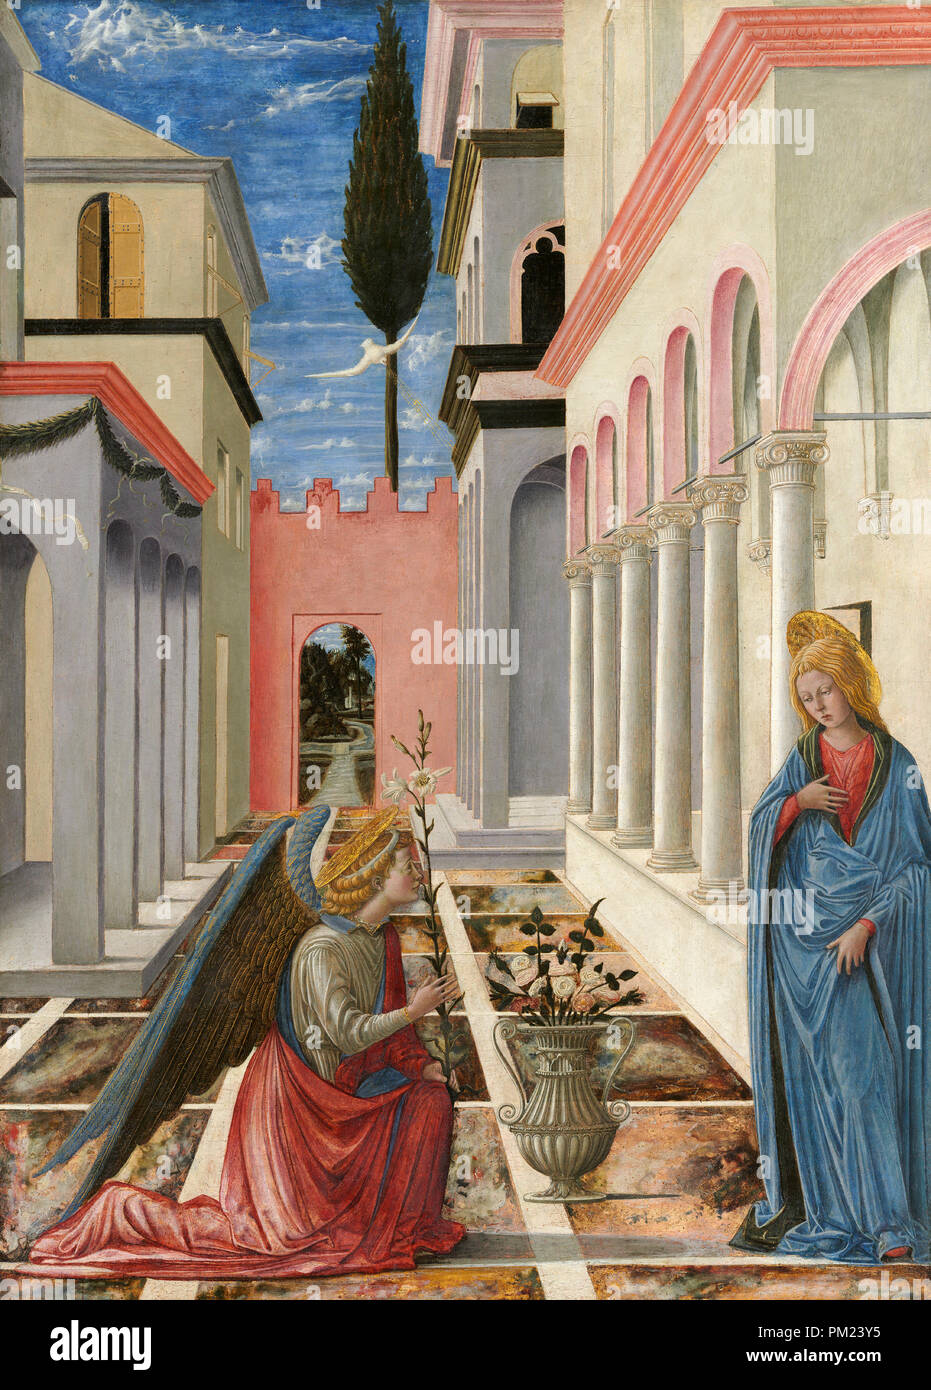 The Annunciation. Dated: c. 1445/1450. Dimensions: overall: 87.6 x 62.8 cm (34 1/2 x 24 3/4 in.)  framed: 120 x 92.4 x 8.3 cm (47 1/4 x 36 3/8 x 3 1/4 in.). Medium: tempera on panel. Museum: National Gallery of Art, Washington DC. Author: FRA CARNEVALE. Stock Photo